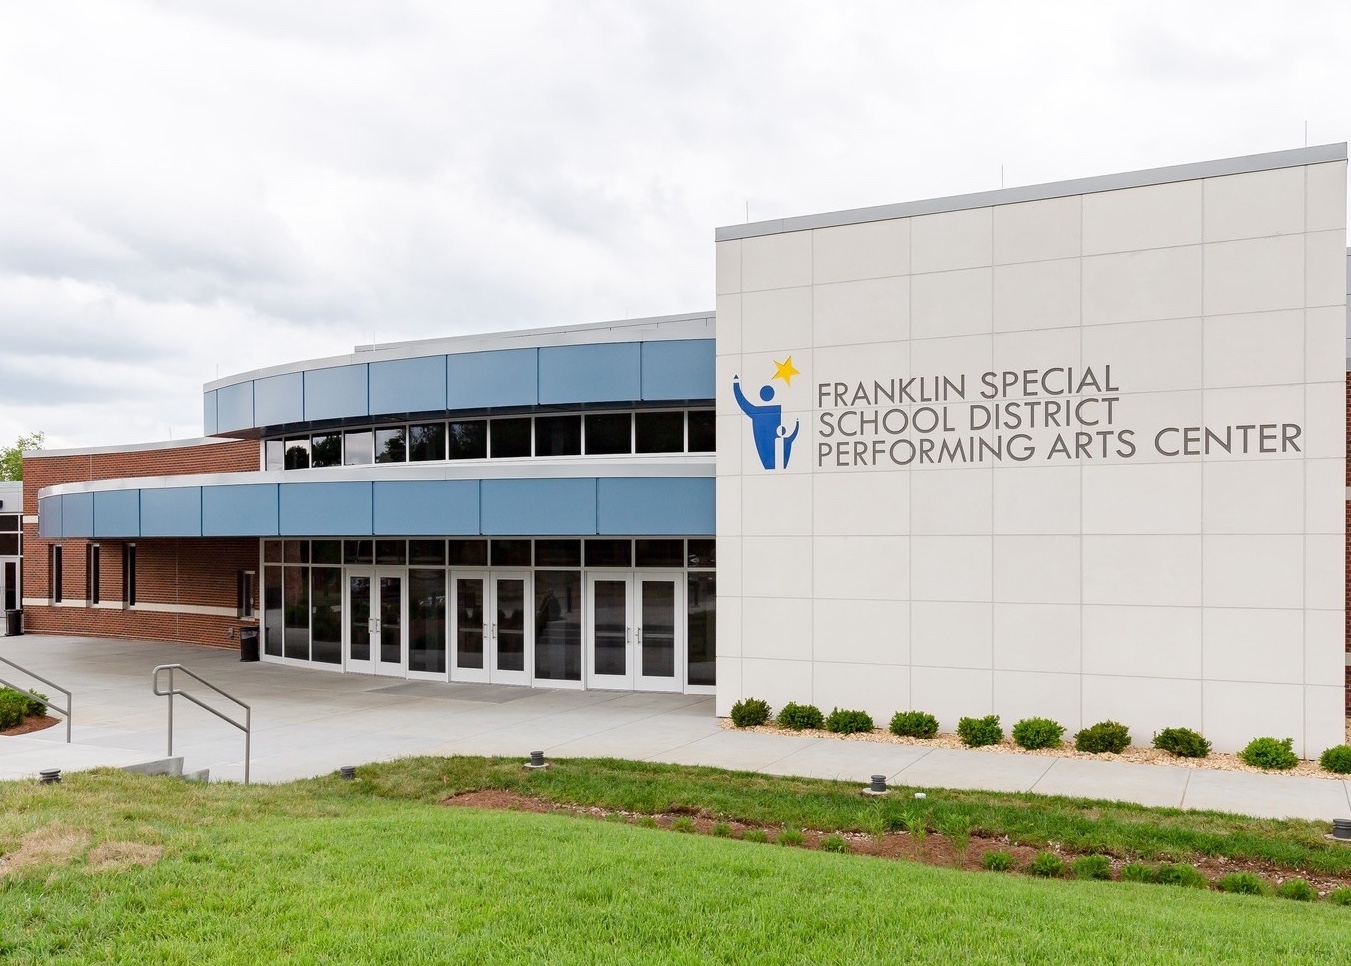 Franklin Special School District Performing Arts Center in Franklin, Tennessee.